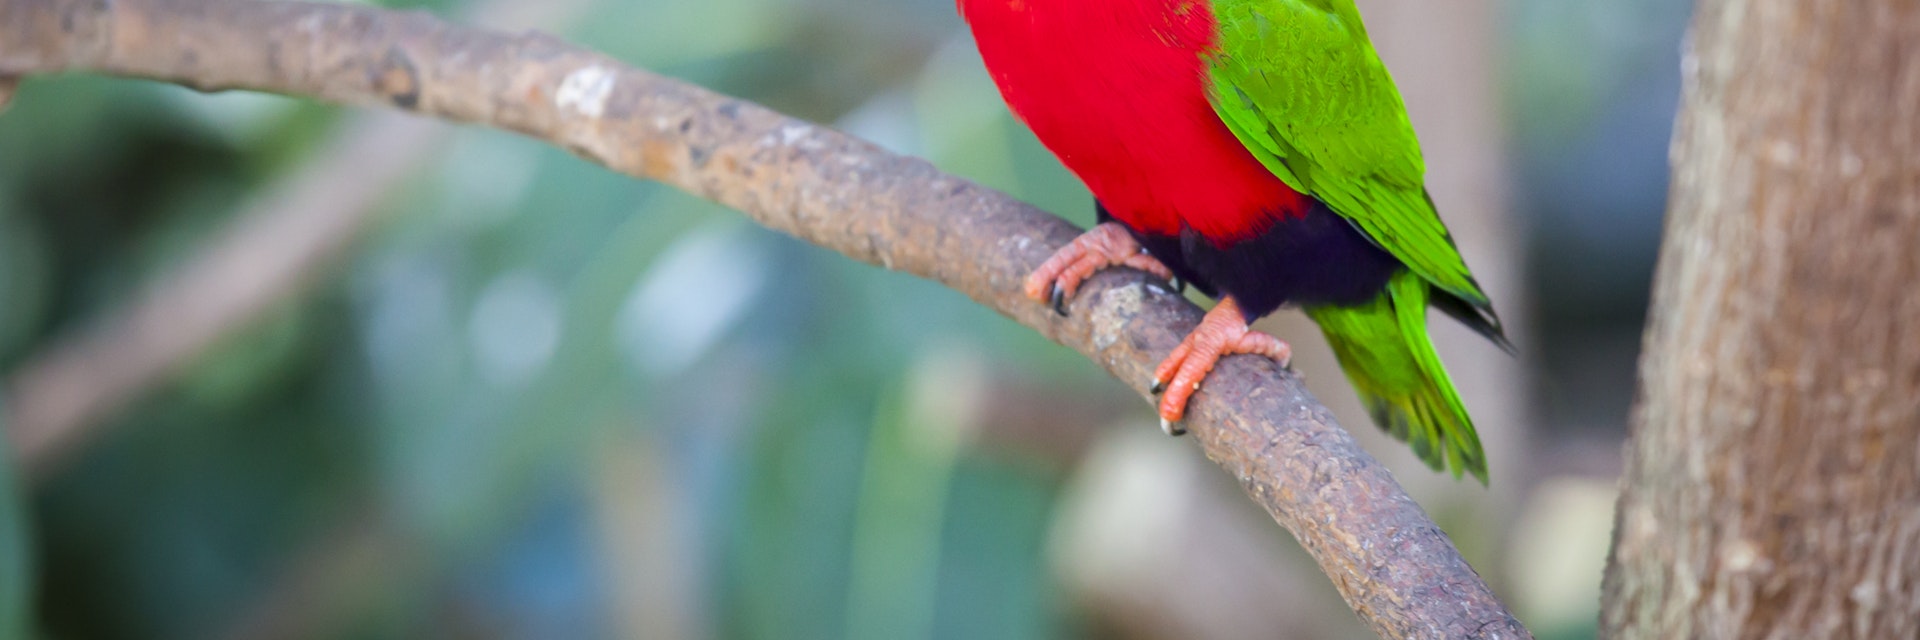 Collared Lory of the Fiji Islands on a Branch.; Shutterstock ID 185633390; Your name (First / Last): Josh/Vogel; GL account no.: 56530; Netsuite department name: Online-Design; Full Product or Project name including edition: 65050/​Online Design​/JoshVogel/IYLs